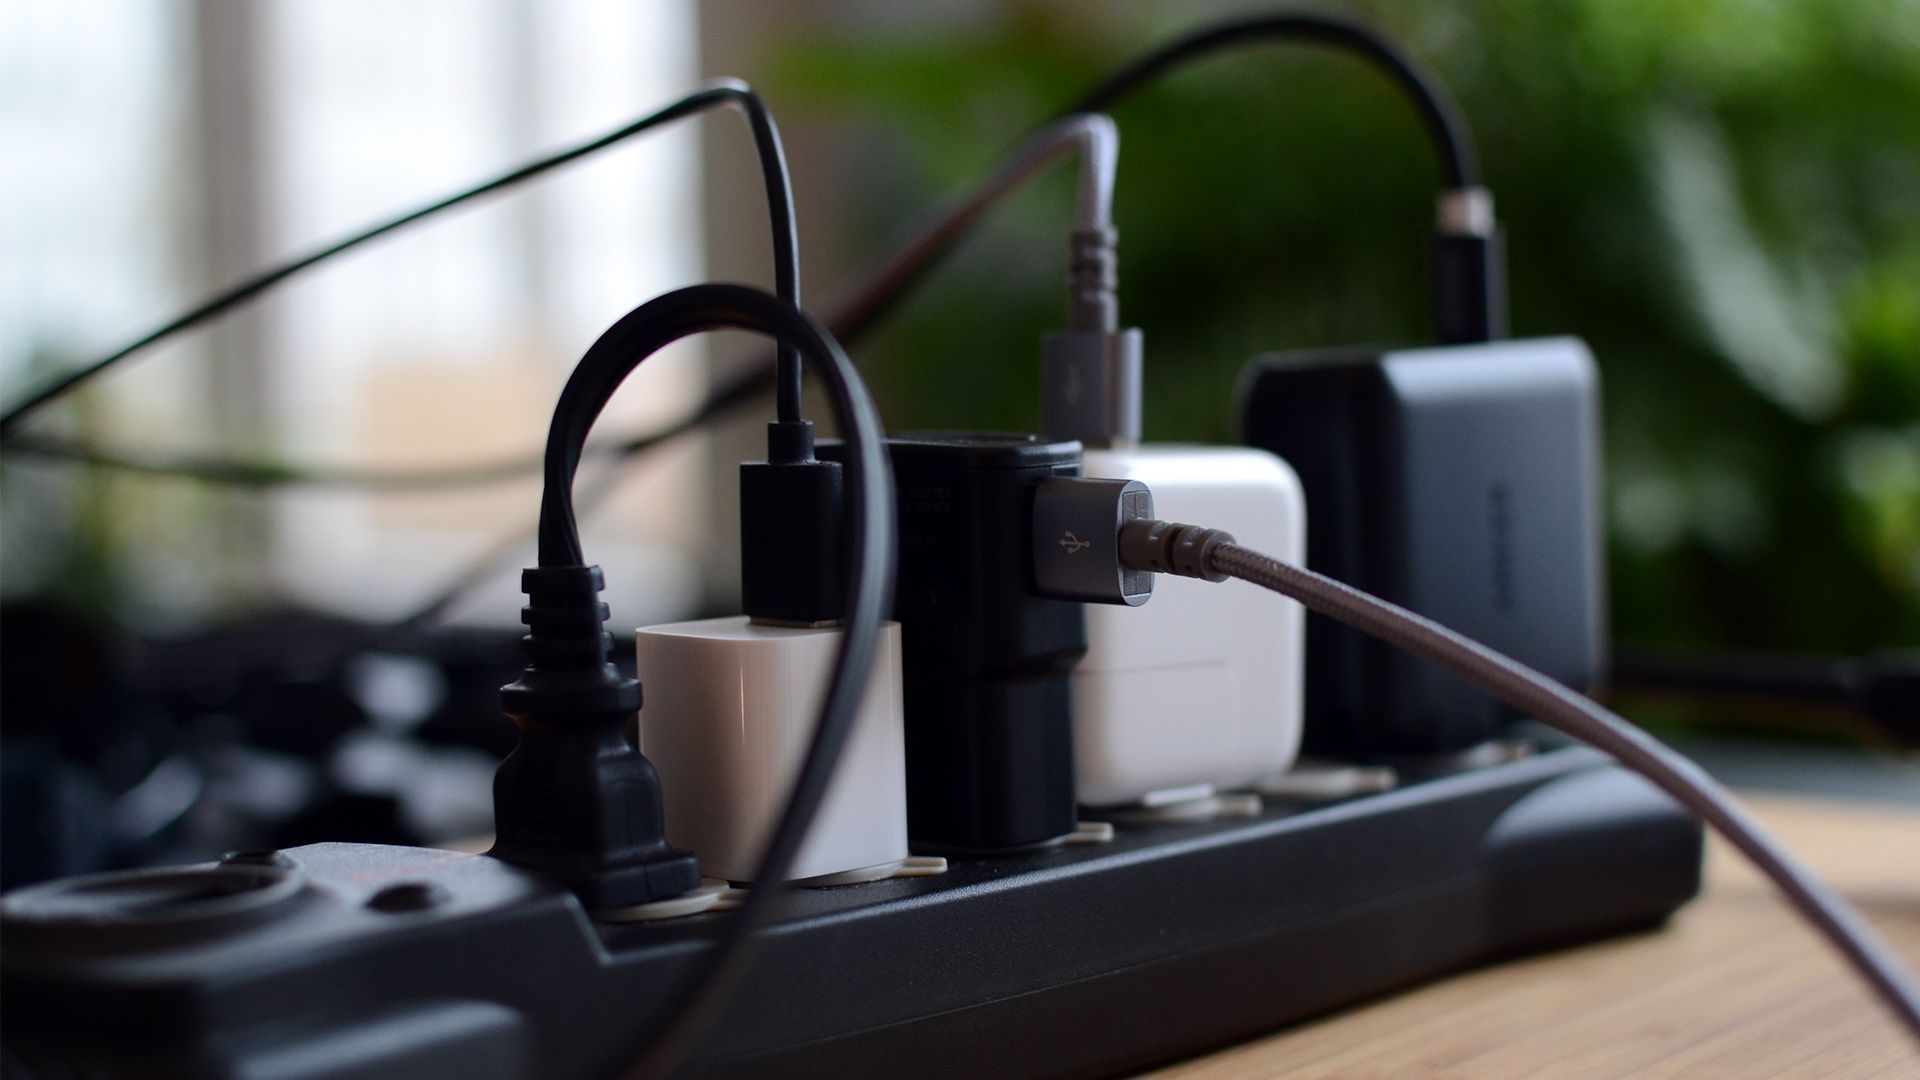 Multiple power adaptors and cables plugged into a power strip